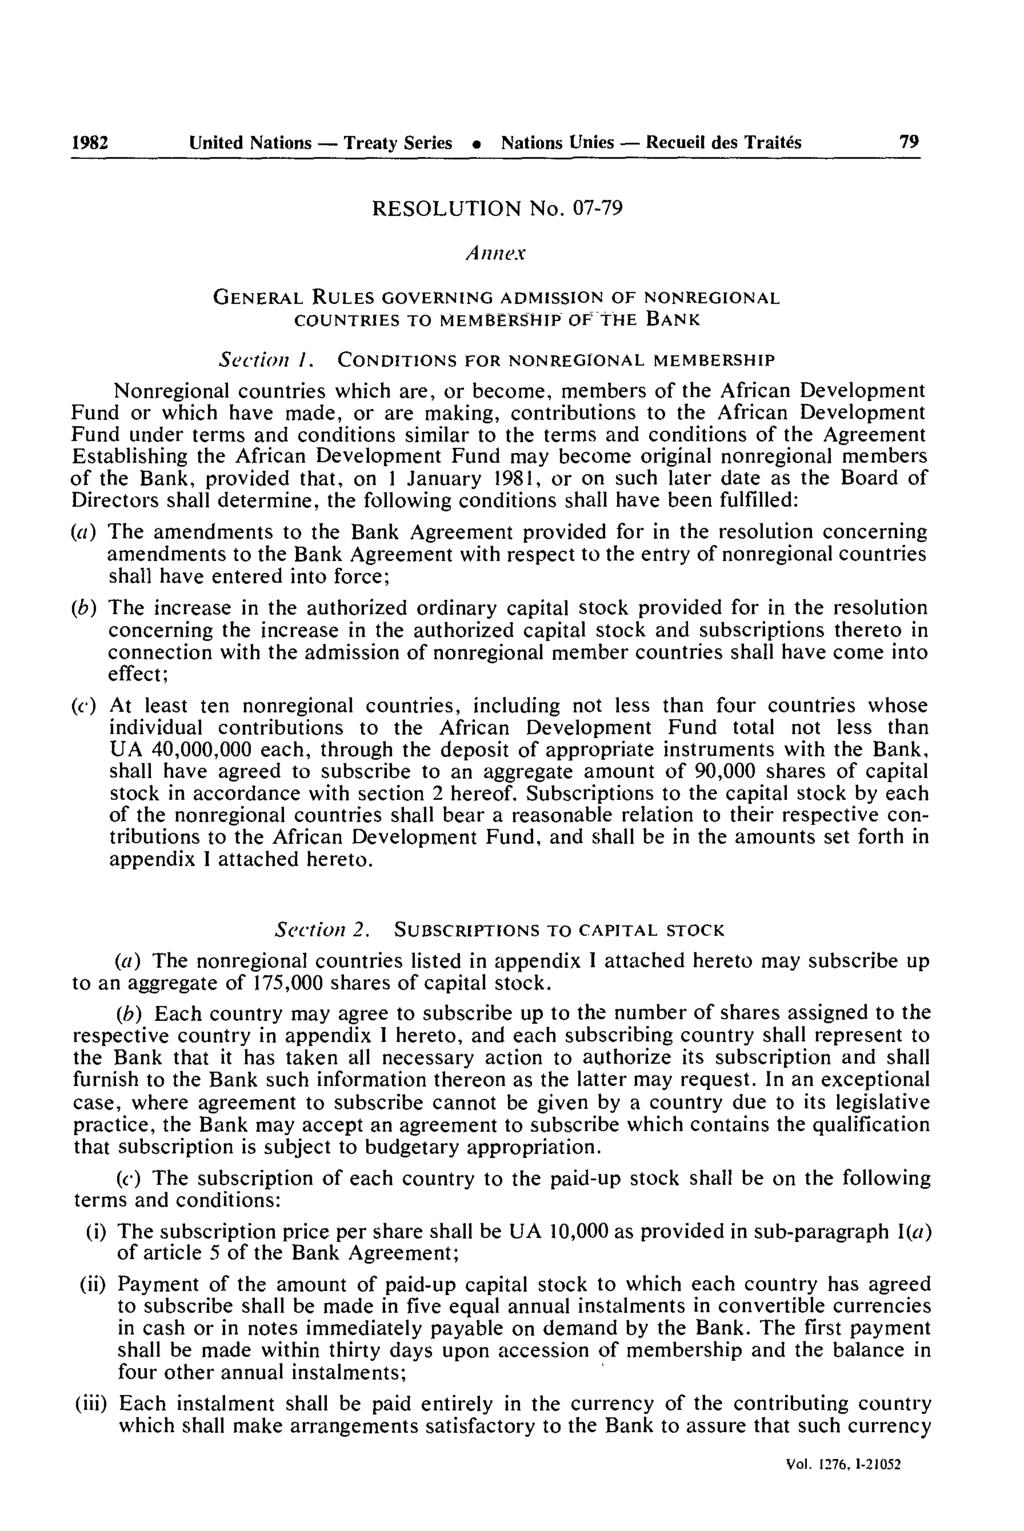 1982 United Nations Treaty Series Nations Unies Recueil des Traités 79 RESOLUTION No. 07-79 Annex GENERAL RULES GOVERNING ADMISSION OF NONREGIONAL COUNTRIES TO MEMBERSHIP OF THE BANK Section I.